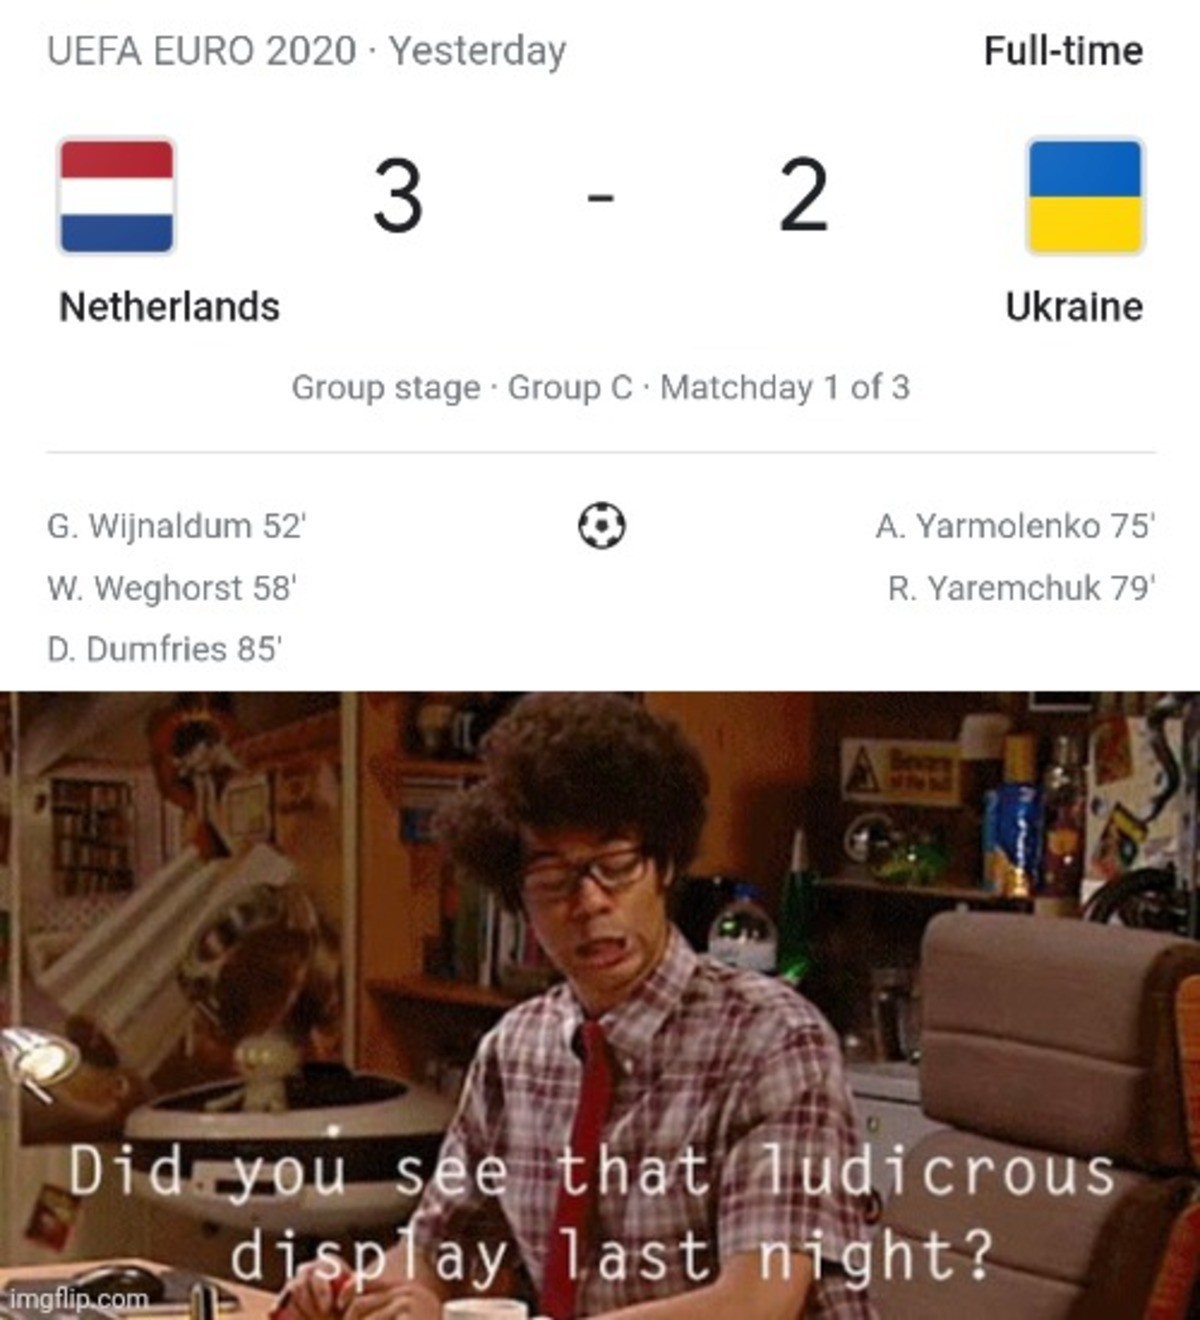 Orange Men Good. I'm a big fan of the Netherlands after that game. Who do you guys think will win the whole thing?.. Idk Netherlands cause u like them &lt;3 hope they kick the ball super hard into the net.